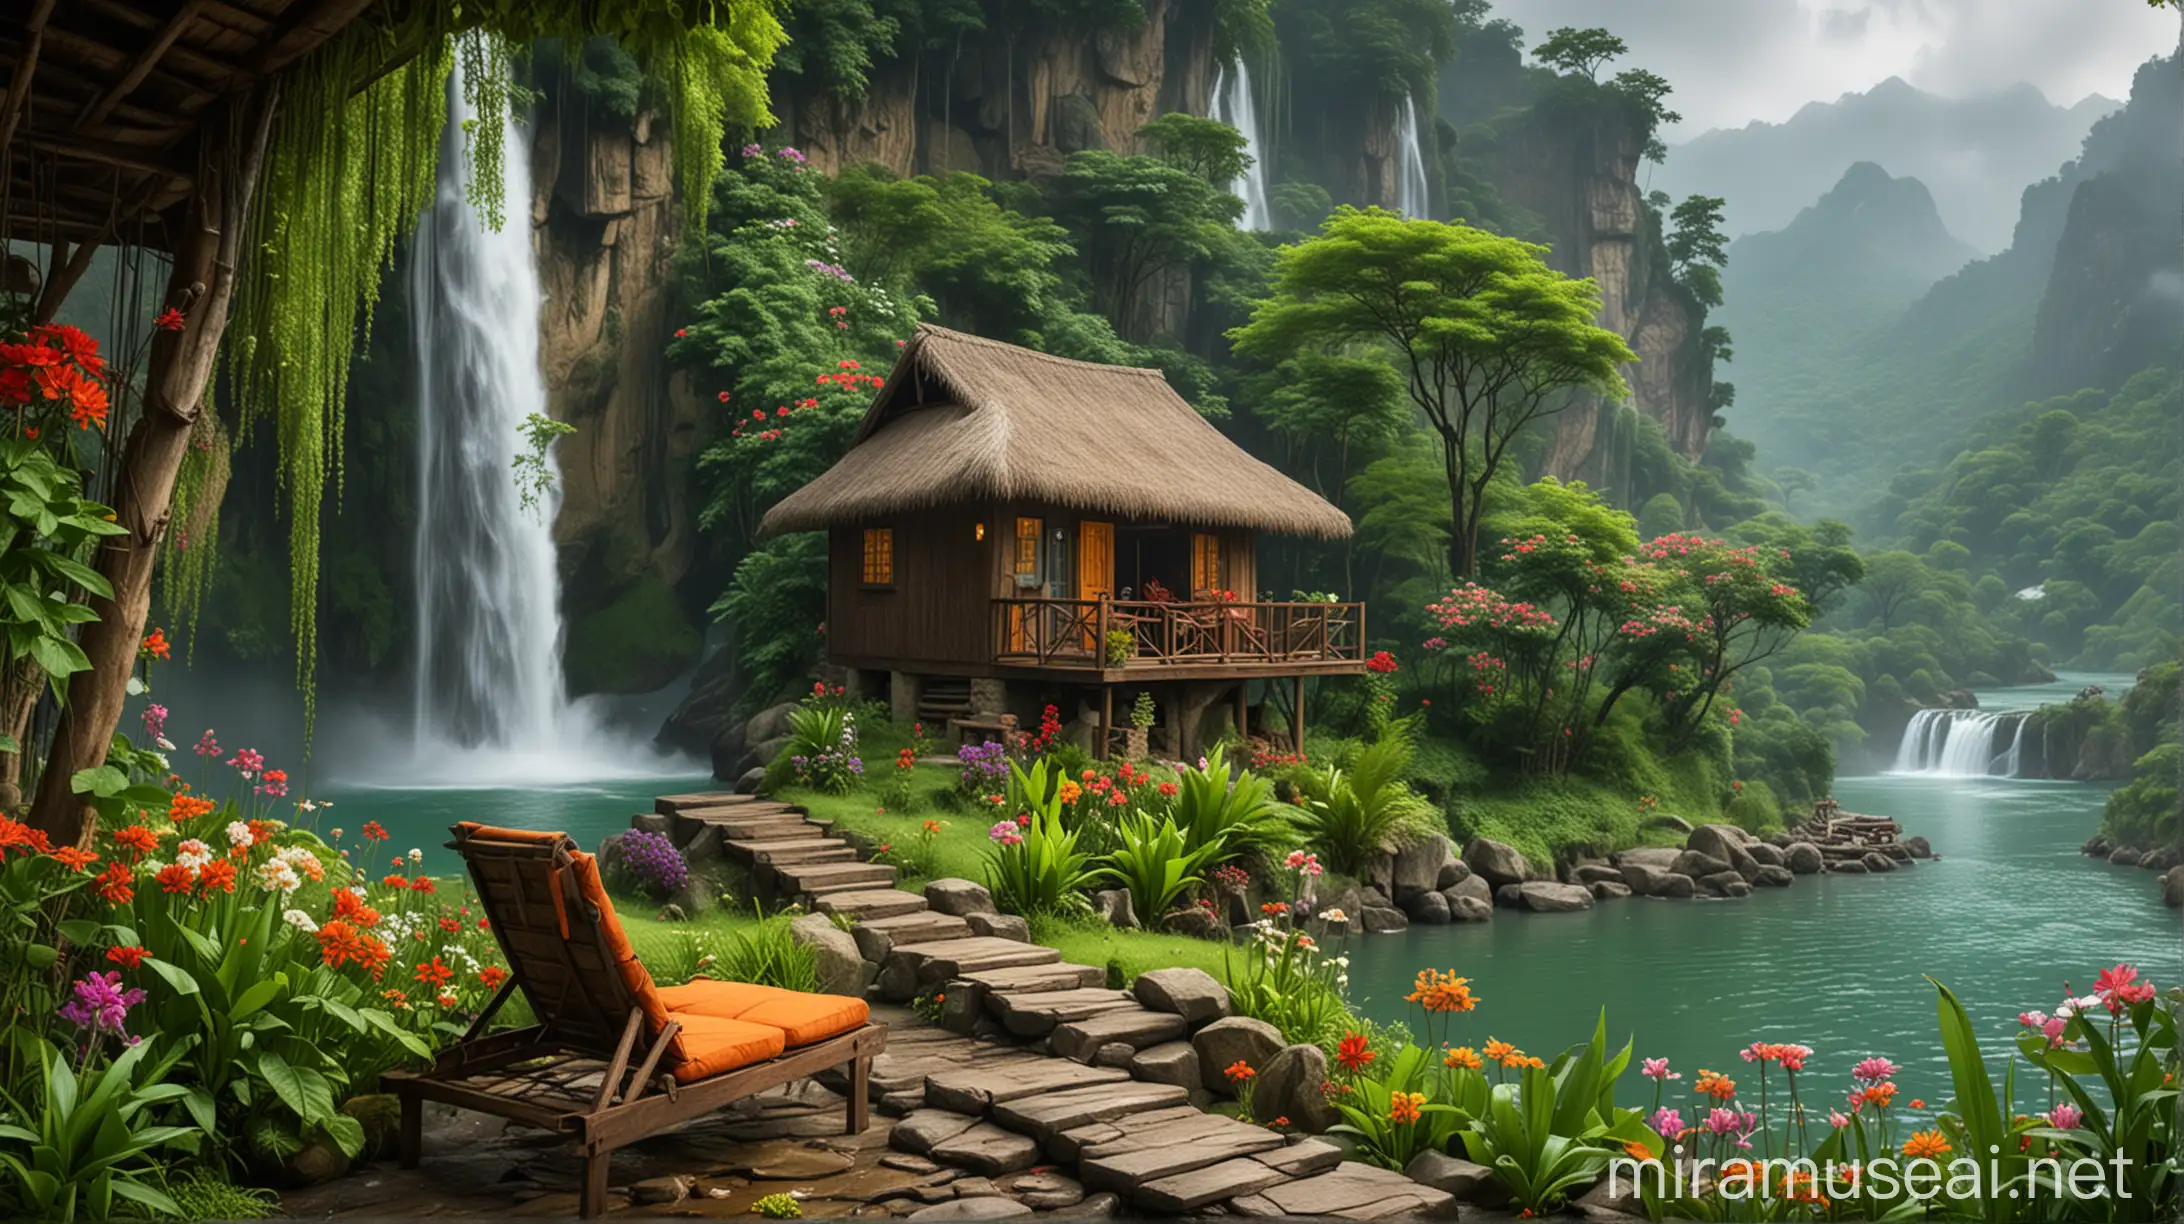 moonsoon house at mountain with flowers and waterfall and sitting chairs a waterfall with a hut and a lake, in the style of 32k uhd, moonsoon emerald and green, colorful dreams, romantic riverscapes, beautiful scenery waterfall view